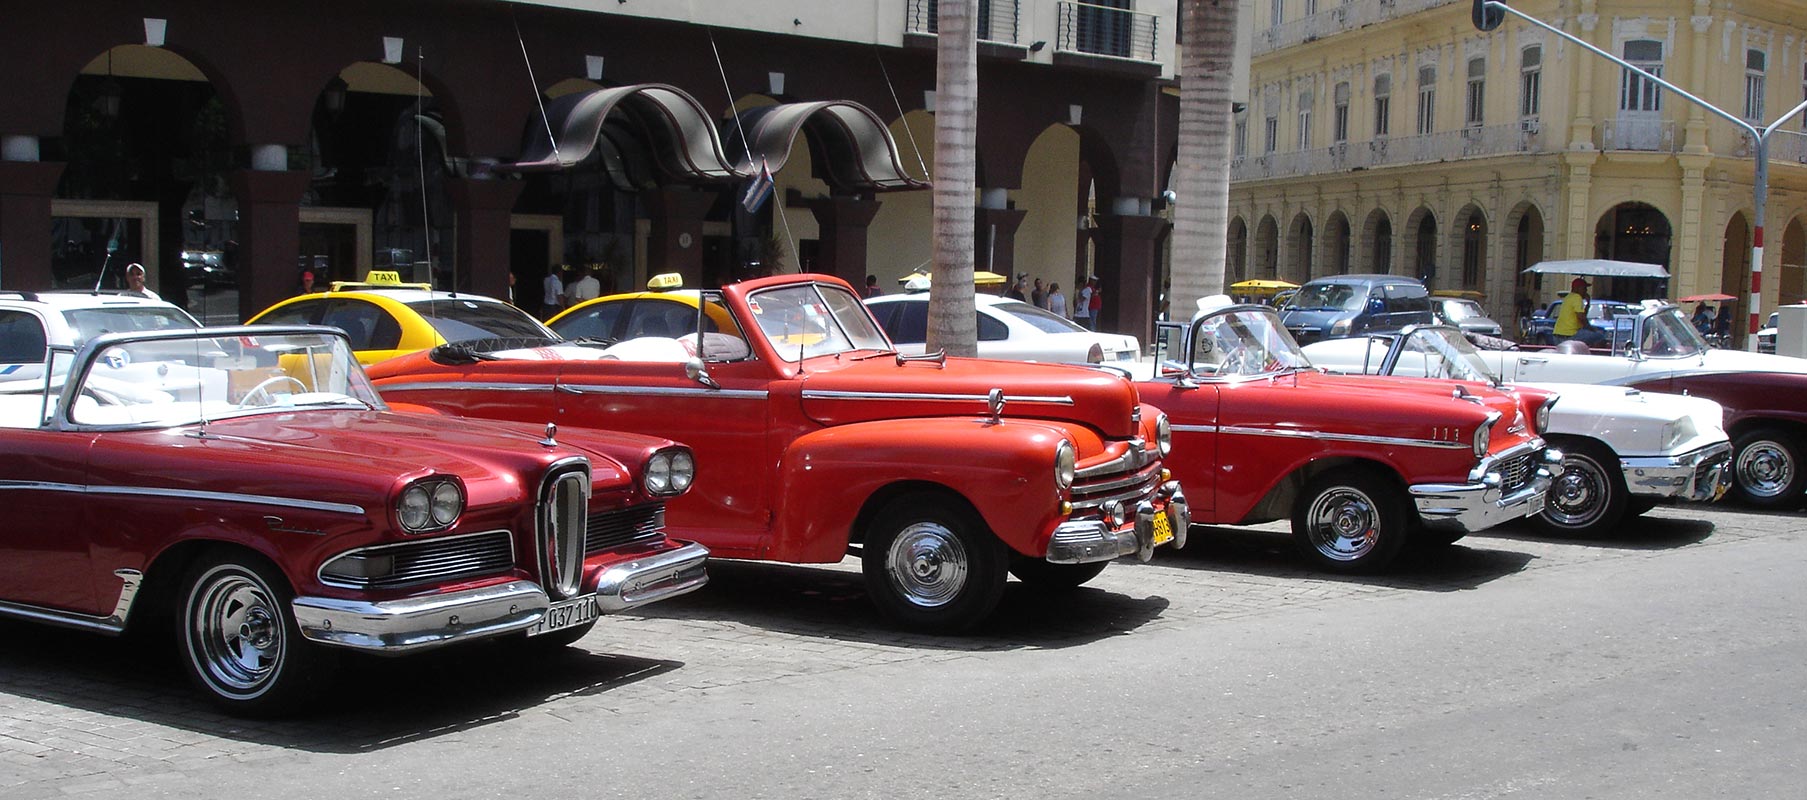 Havana's old cars is like traveling in time machine OldCarTours